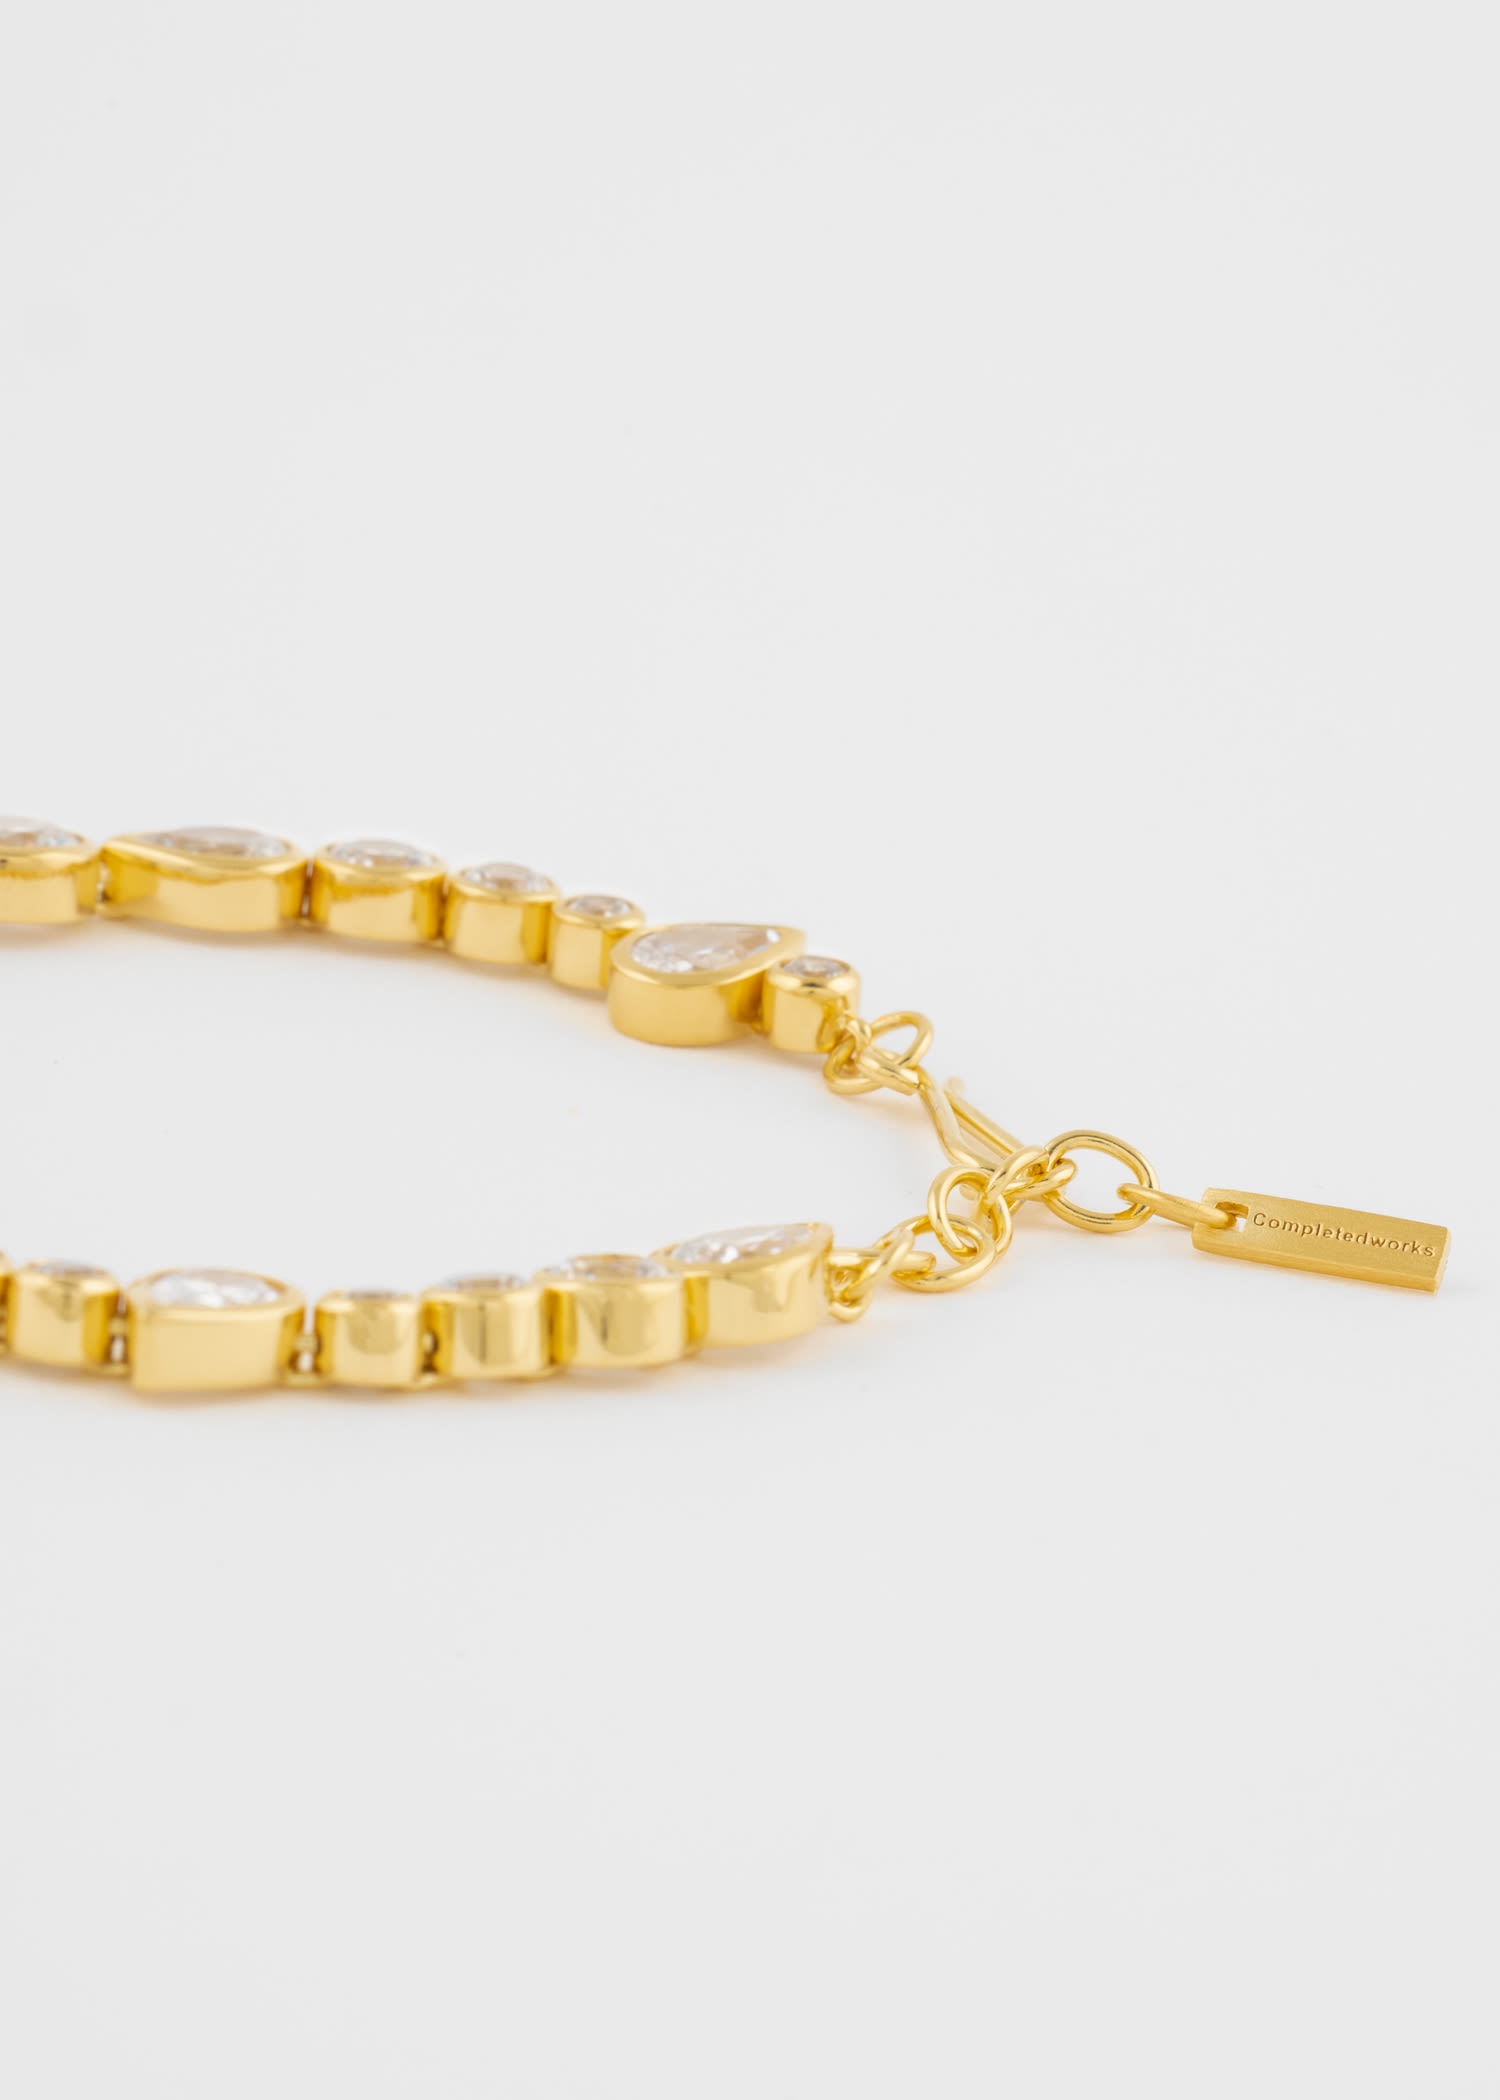 Cubic Zirconia and Gold Vermeil Bracelet by Completedworks - 3